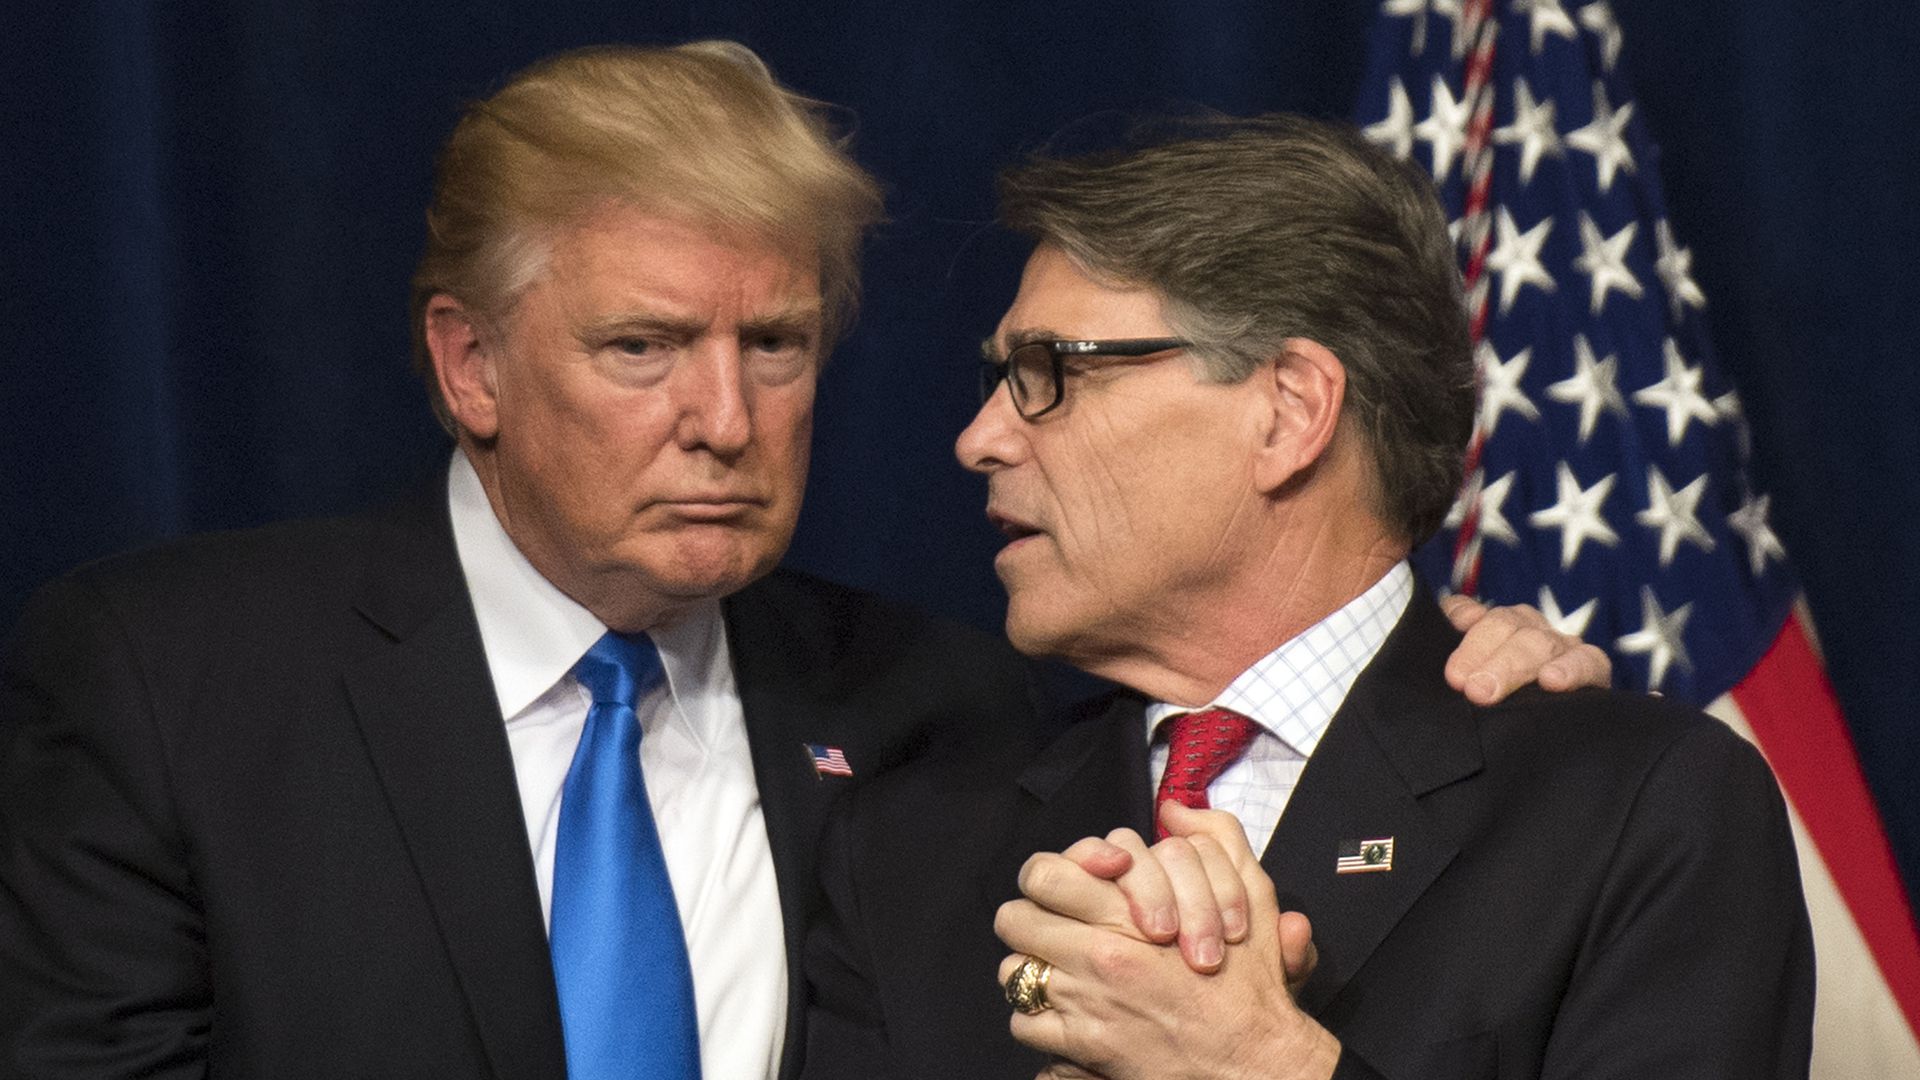 ‘God’s used imperfect people all through history’: Perry shares why he thinks Trump is the ‘chosen one’